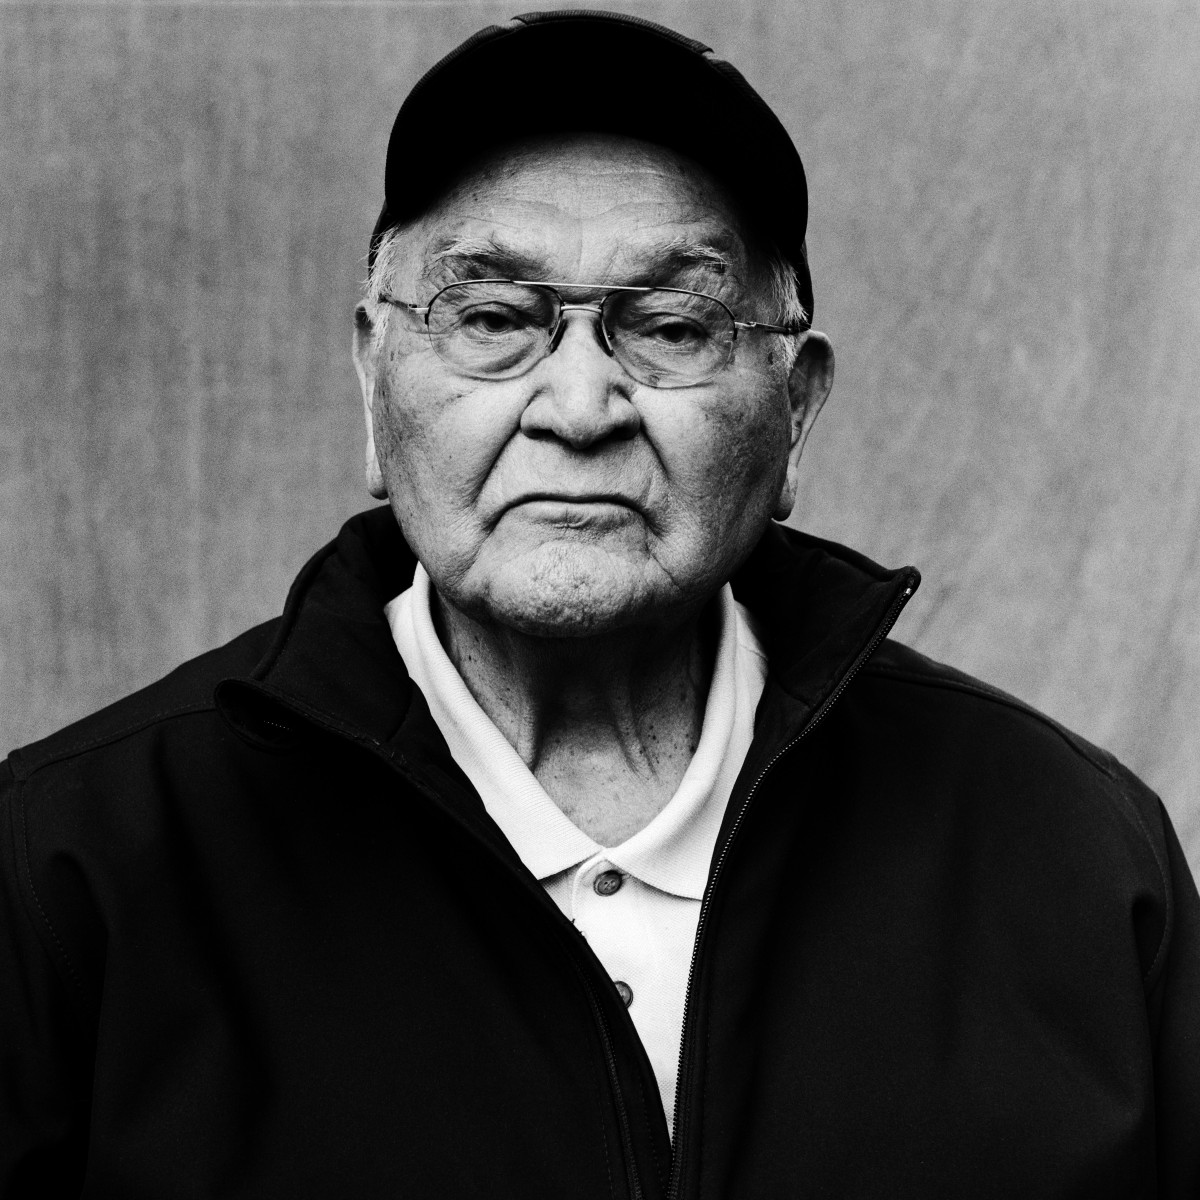 Pat Charleson is one of the nine elders who participates in the Hesquiaht Language Program.  As a boy, the 90-year-old remembers listening to his father and the elders speaking their language. "I understood all the words they were saying," he said. "I really never lost it – it was all in my head."  The Hesquiaht elder met late-wife, Mamie, at Christy Residential School. They went on to have 15 children together.  Now, Charleson has 53 grandchildren, 106 great-grandchildren and 40 great-great-grandchildren.